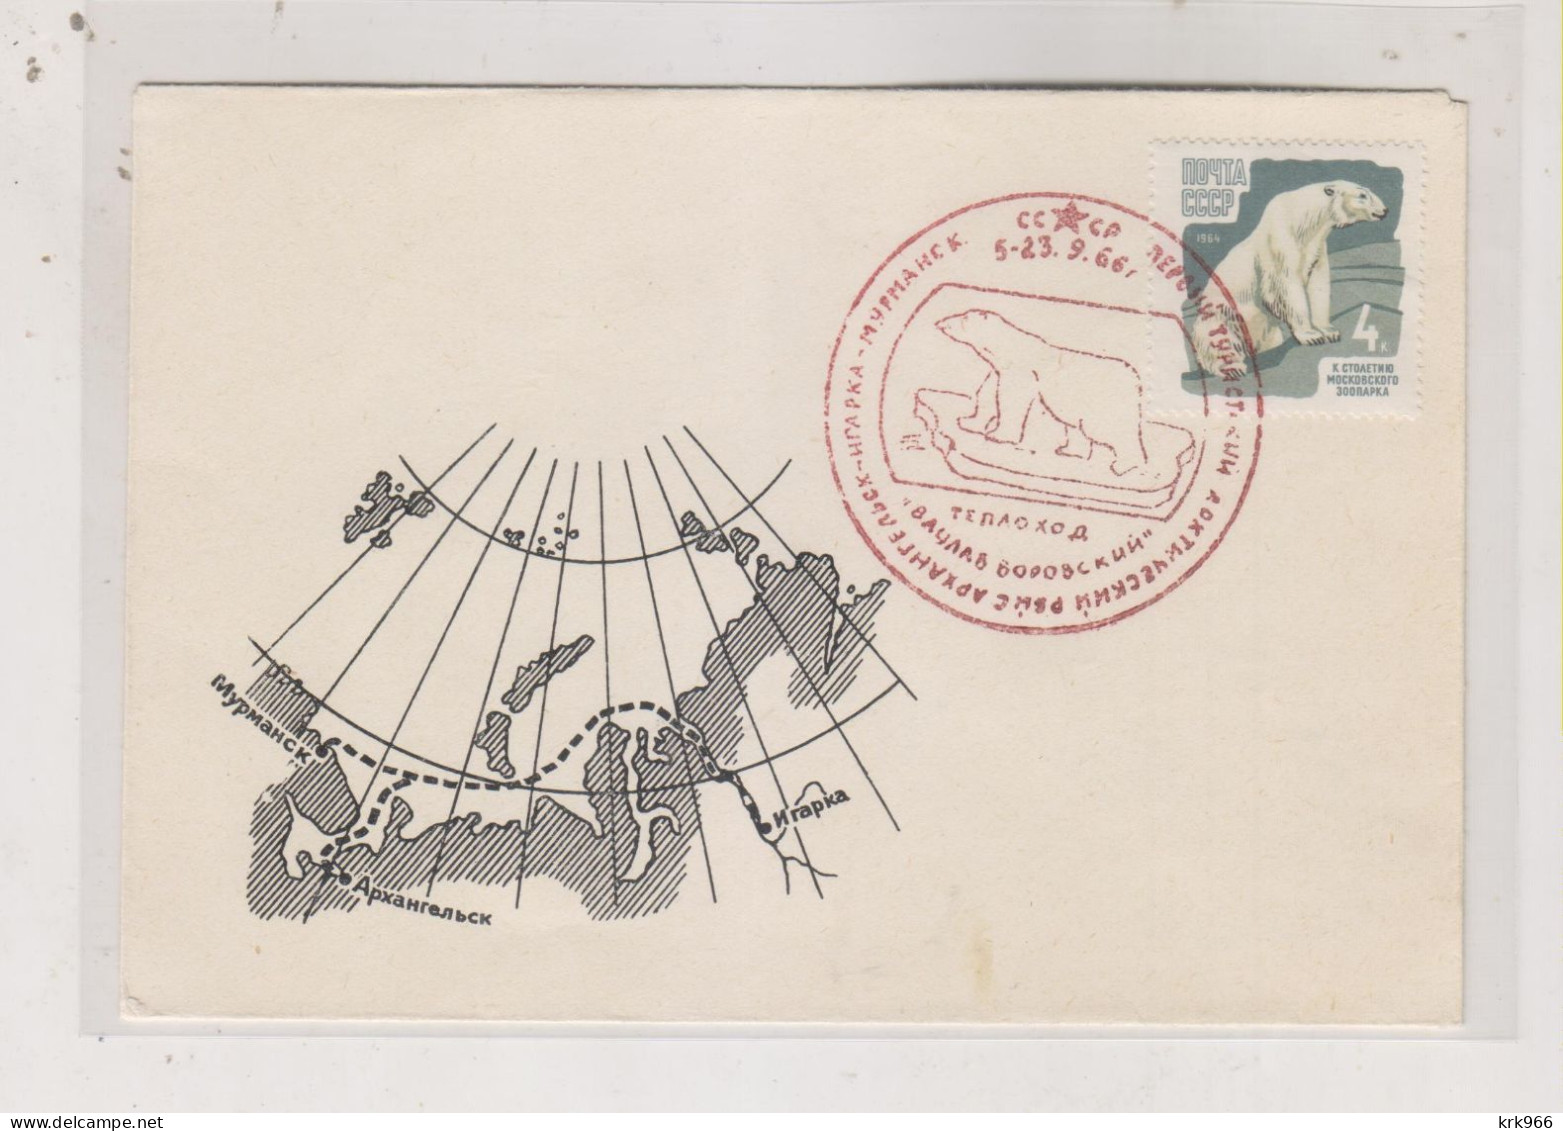 RUSSIA, 1966 Nice Cover NORTH POLE - Lettres & Documents